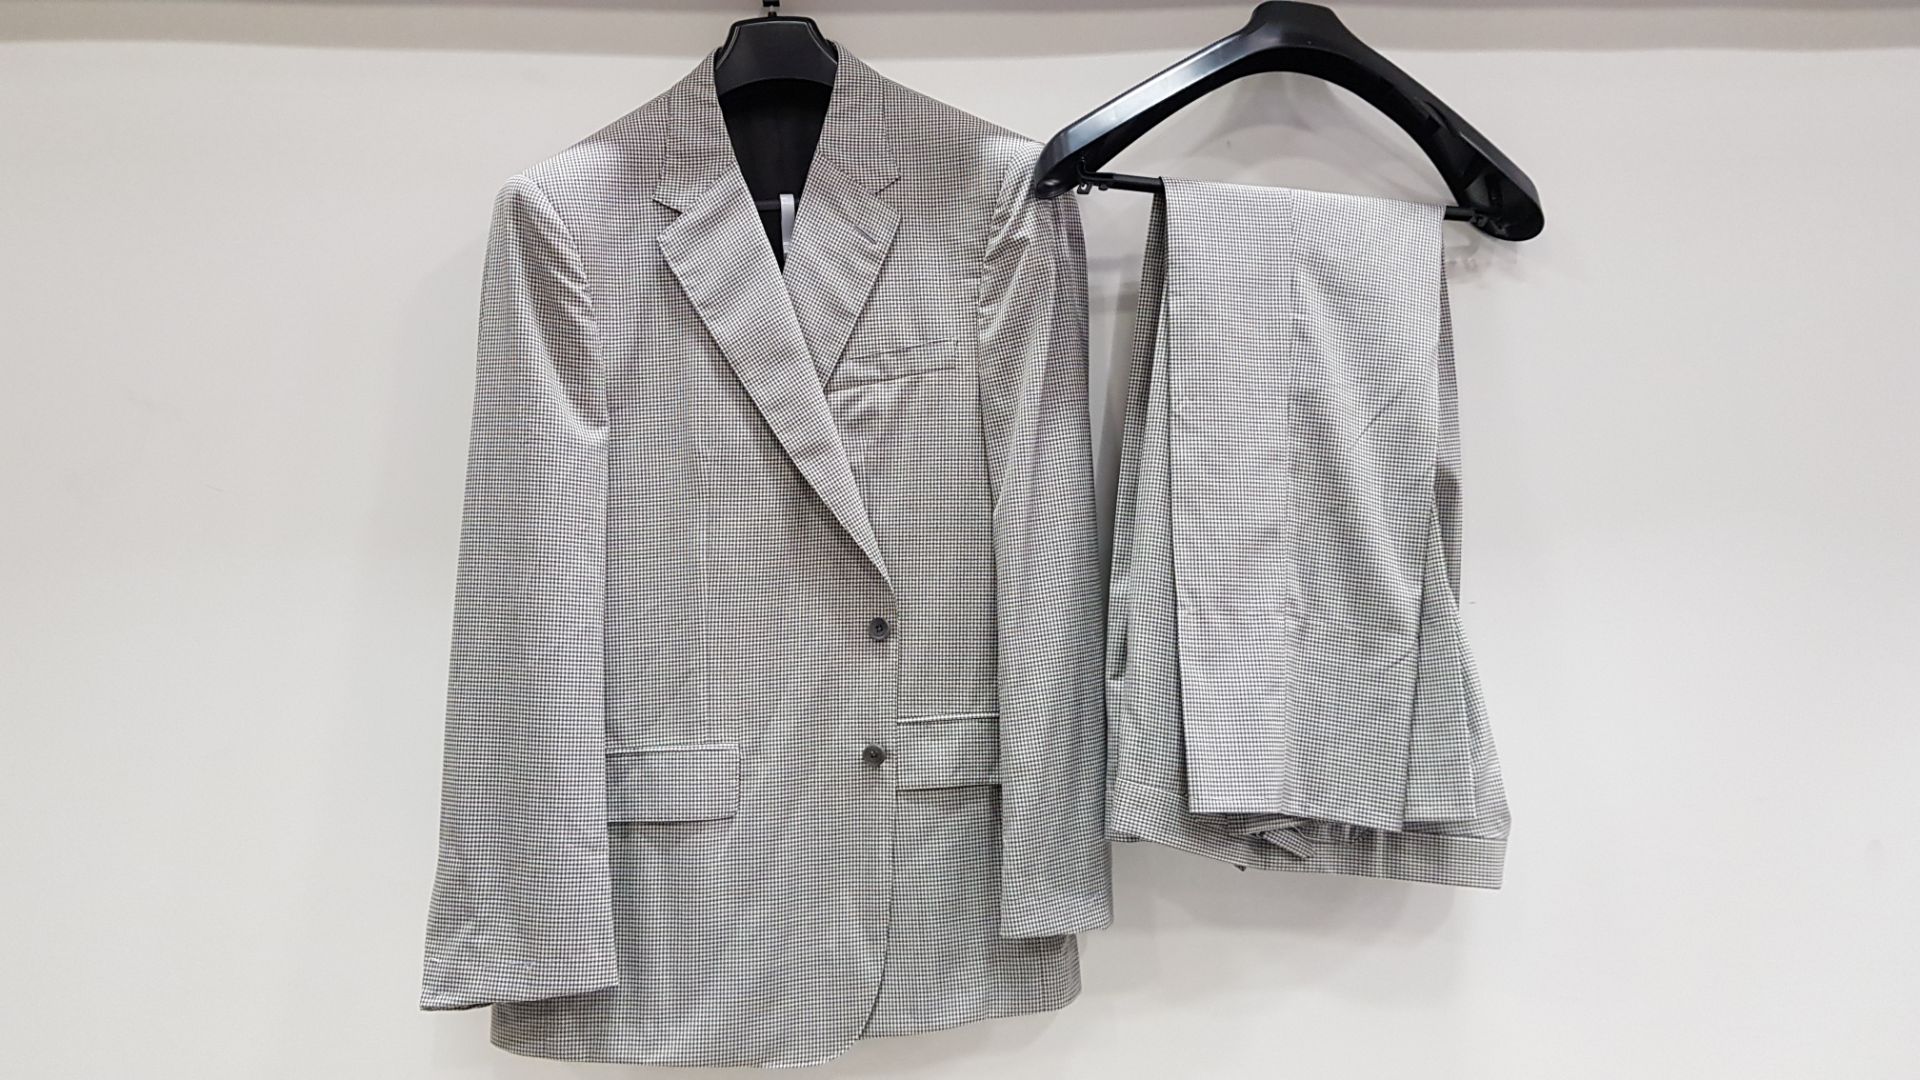 3 X BRAND NEW LUTWYCHE HAND TAILORED GREY & WHITE SUITS SIZE 44R, 48R AND 46R (PLEASE NOTE SUITS ARE